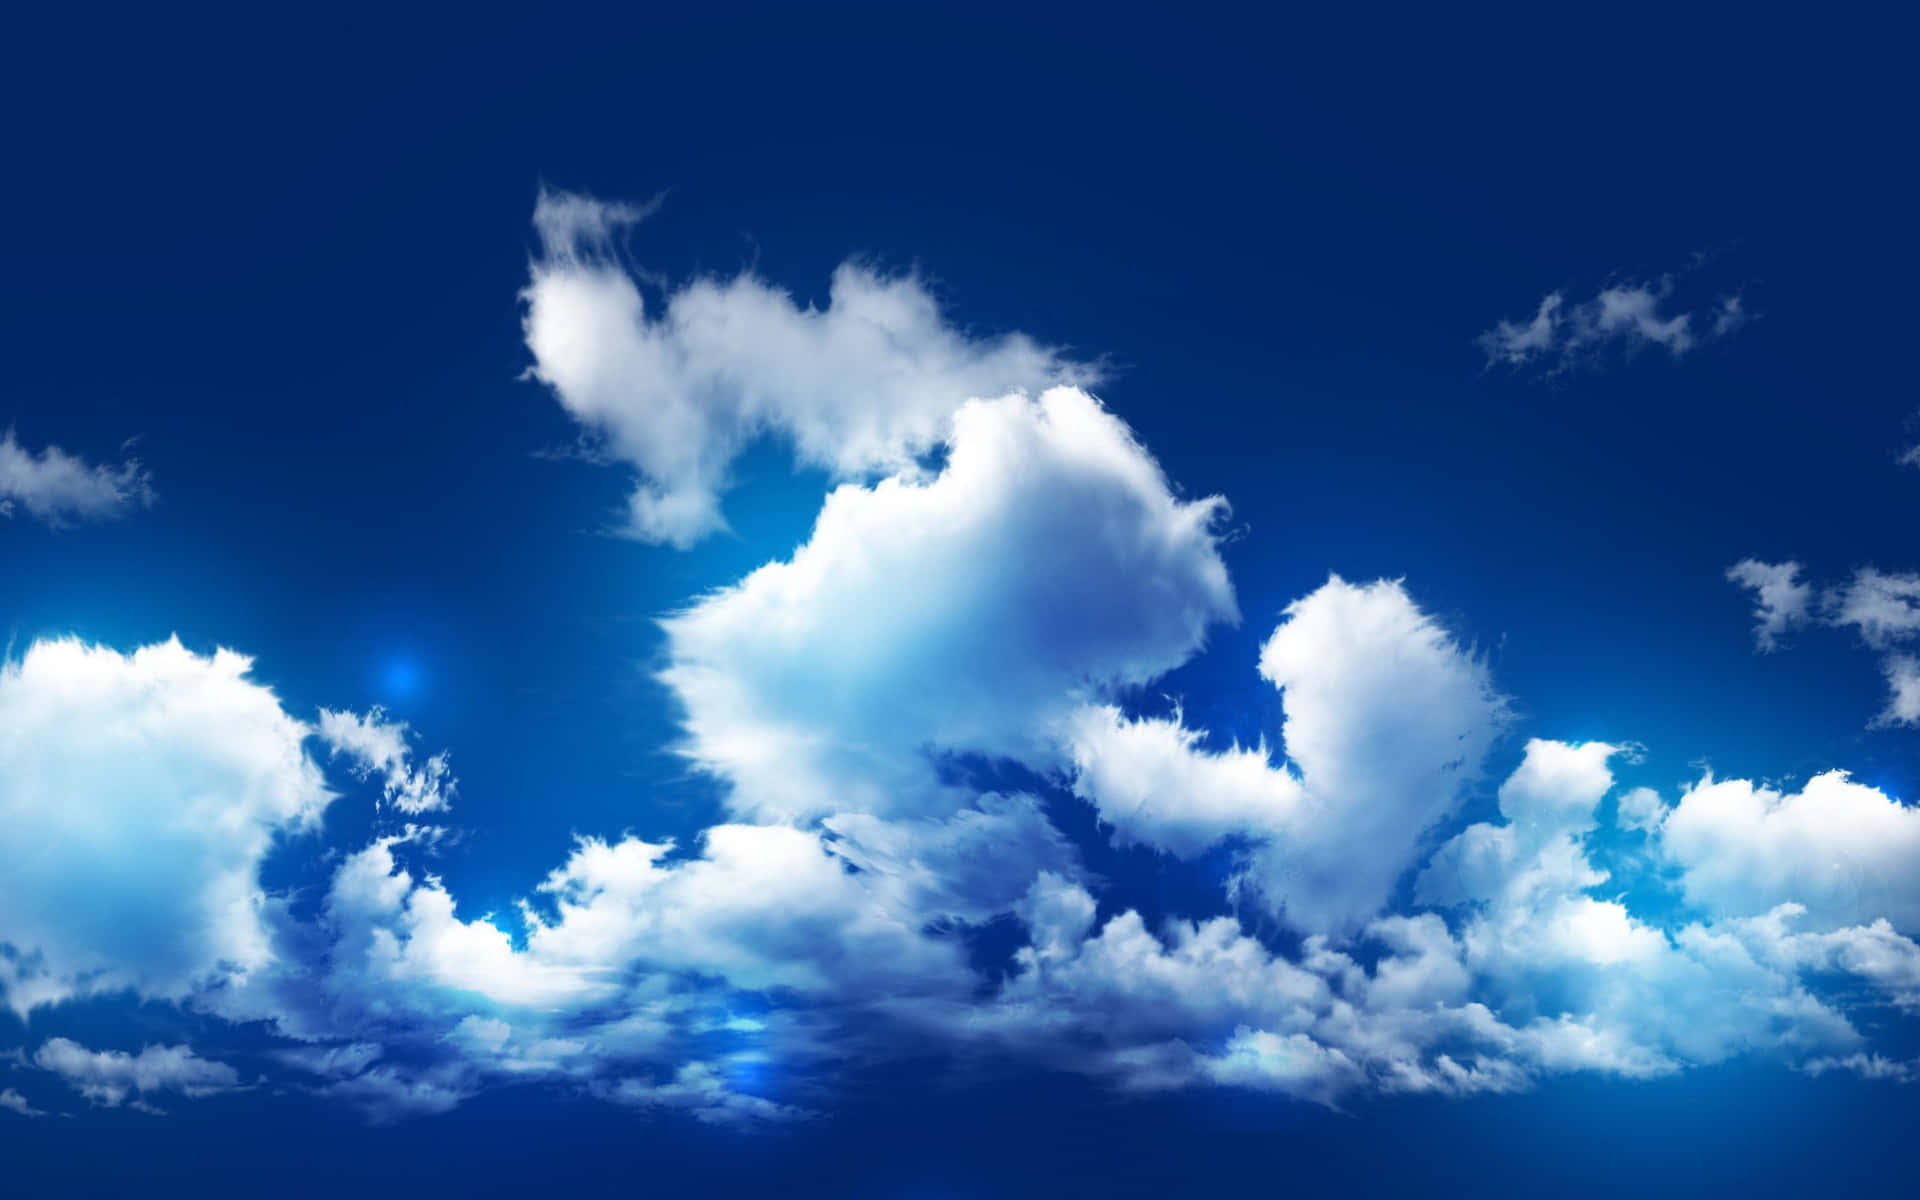 "Soar above the clouds with this beautiful blue sky background."